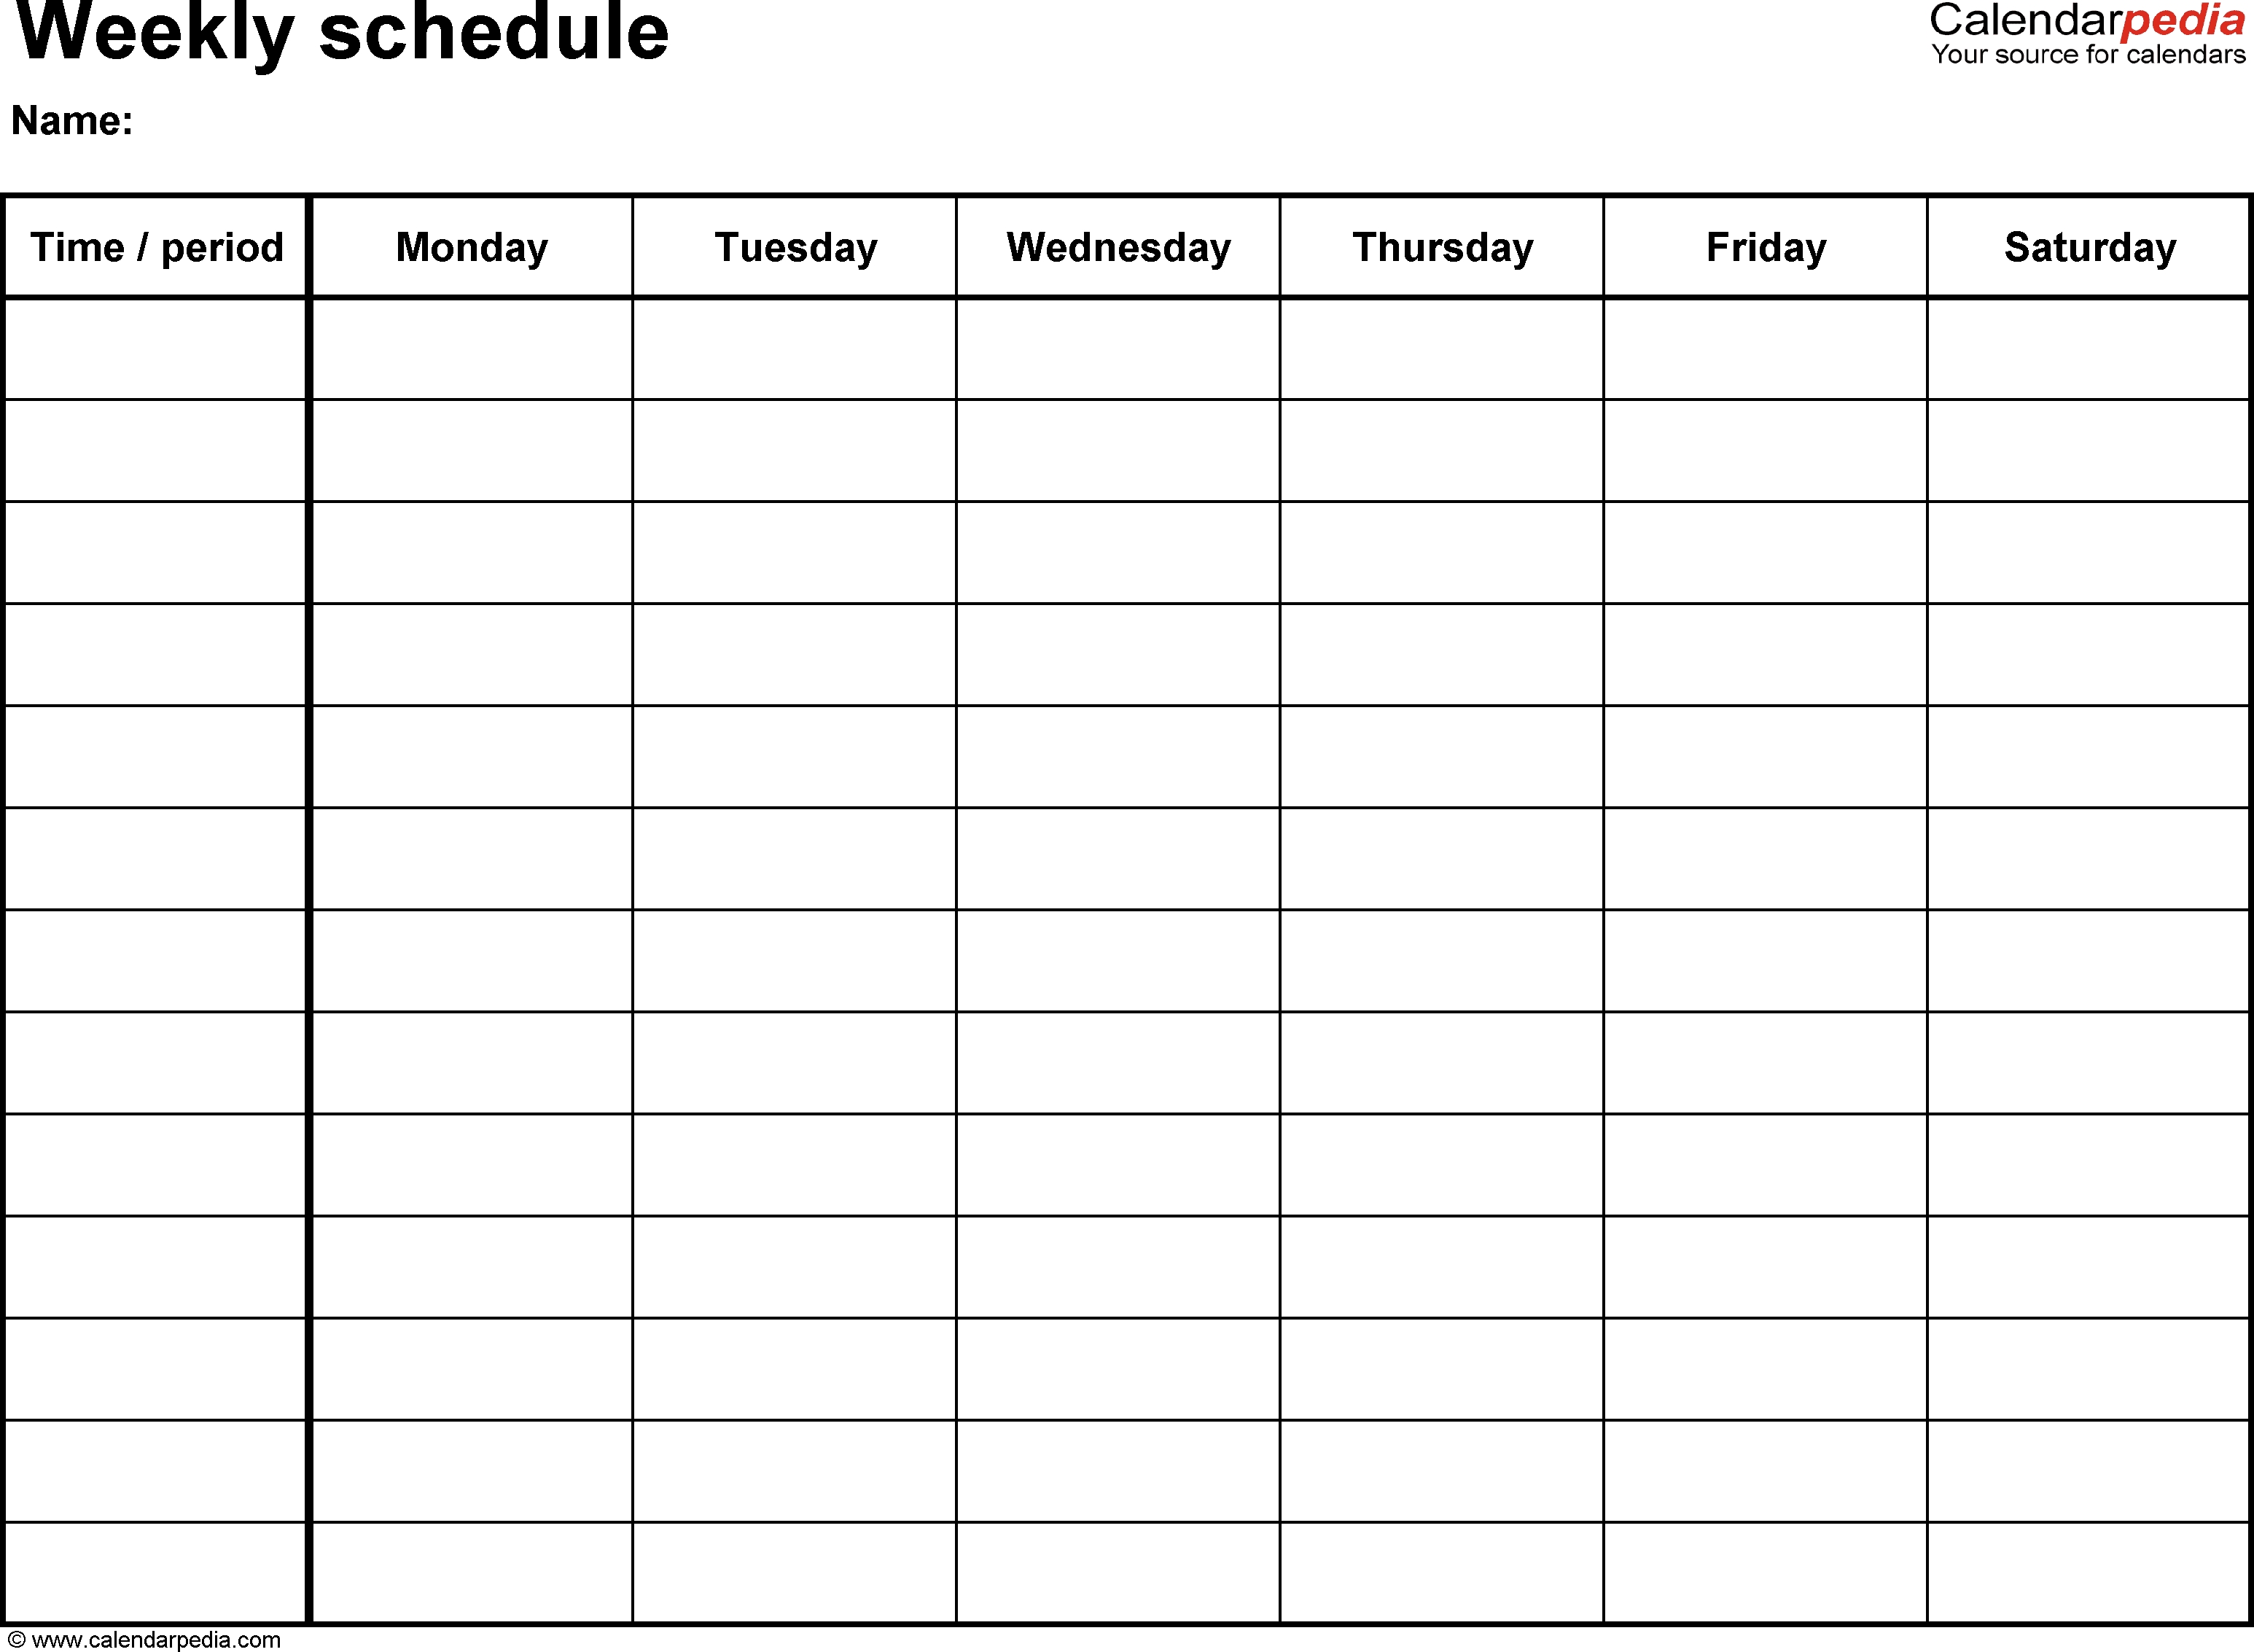 Free Weekly Schedule Templates For Word - 18 Templates Remarkable To Fill In Blank Calendar Monday Friday